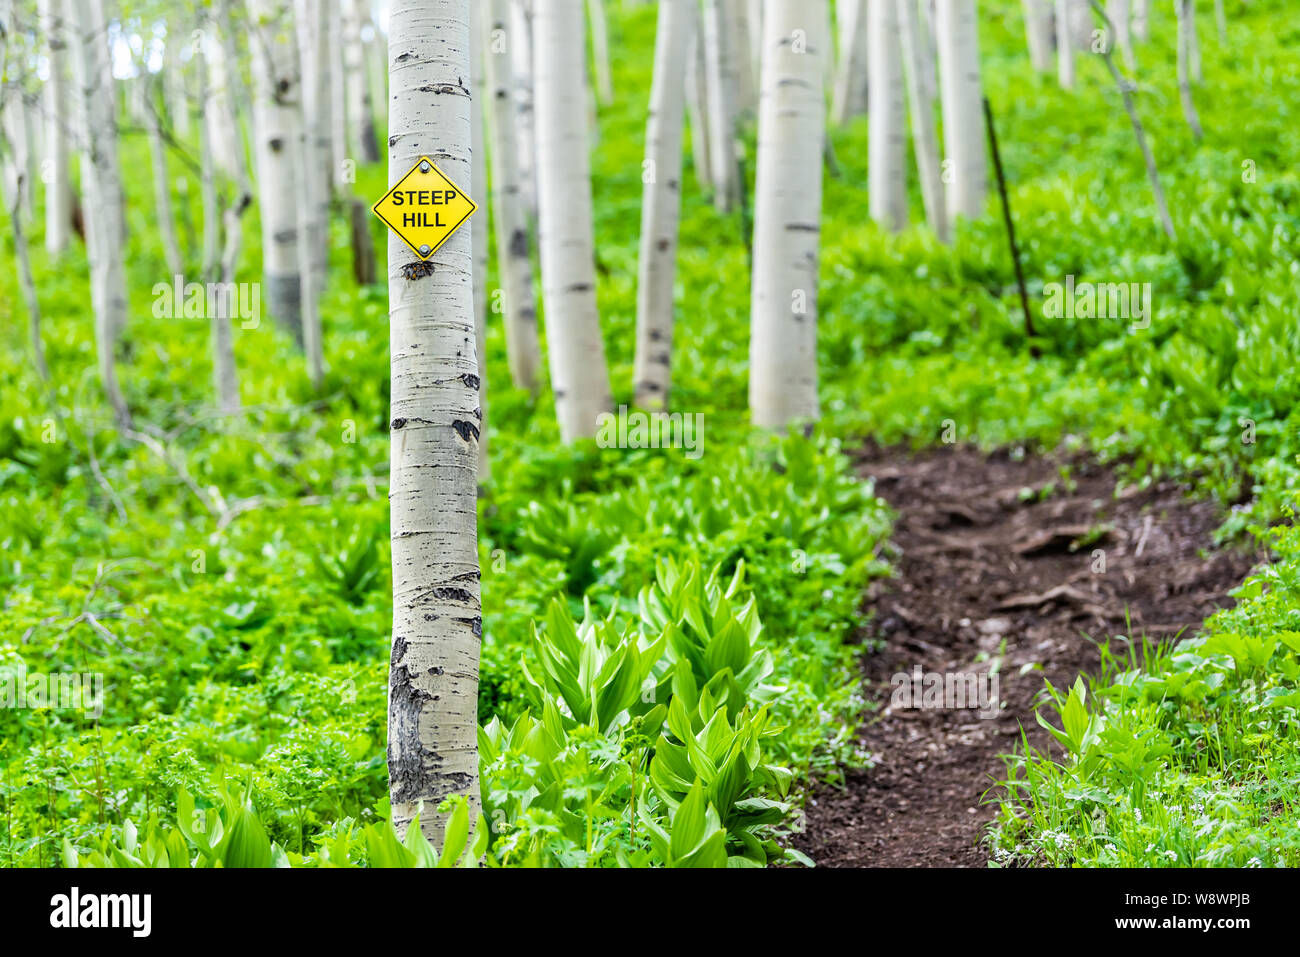 Aspen forest trees with steep hill sign in summer in Snodgrass trail in Mount Crested Butte, Colorado in National Forest park mountains with green col Stock Photo